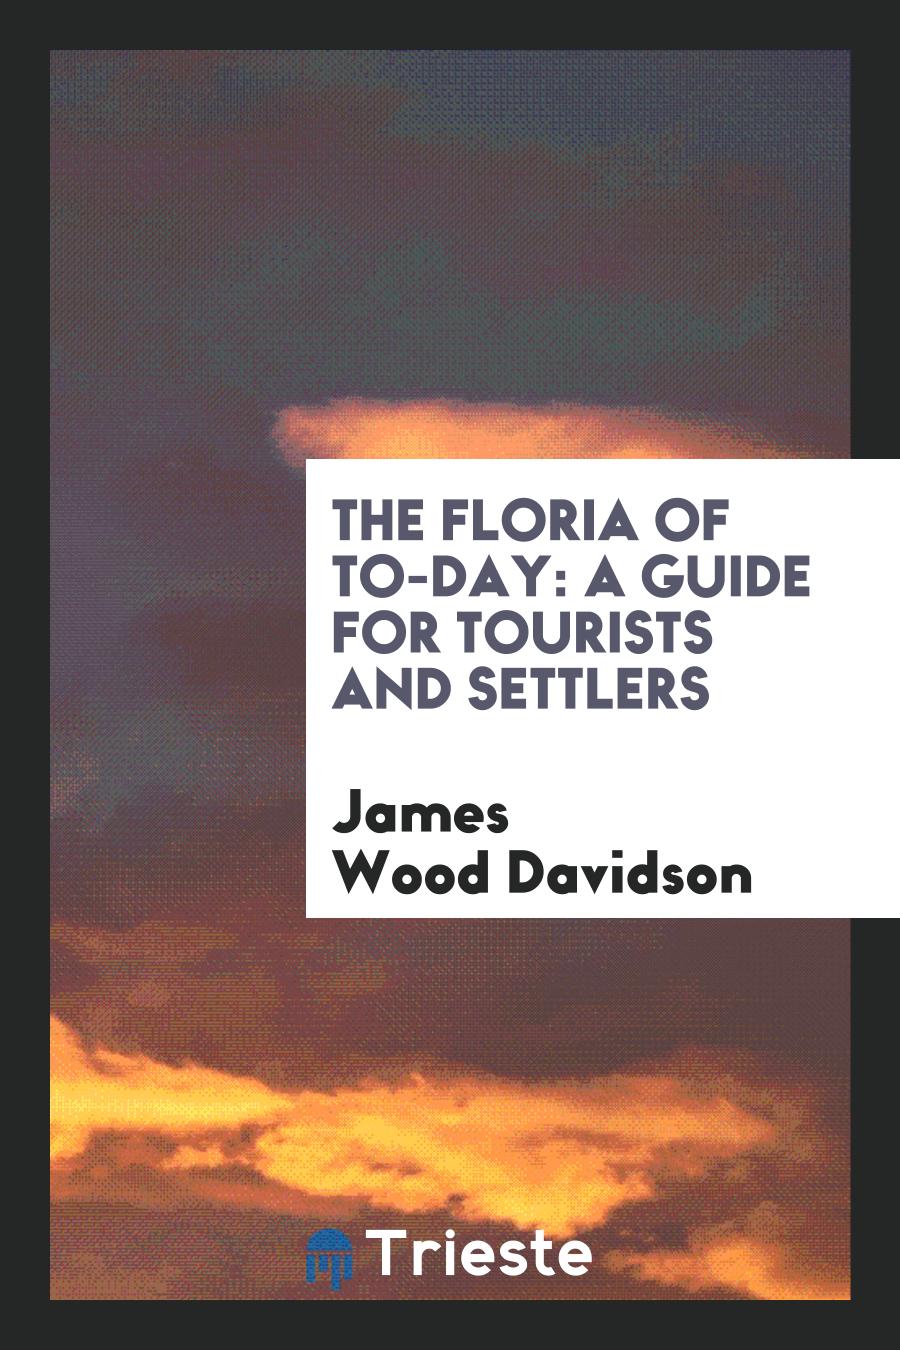 The Floria of To-Day: A Guide for Tourists and Settlers